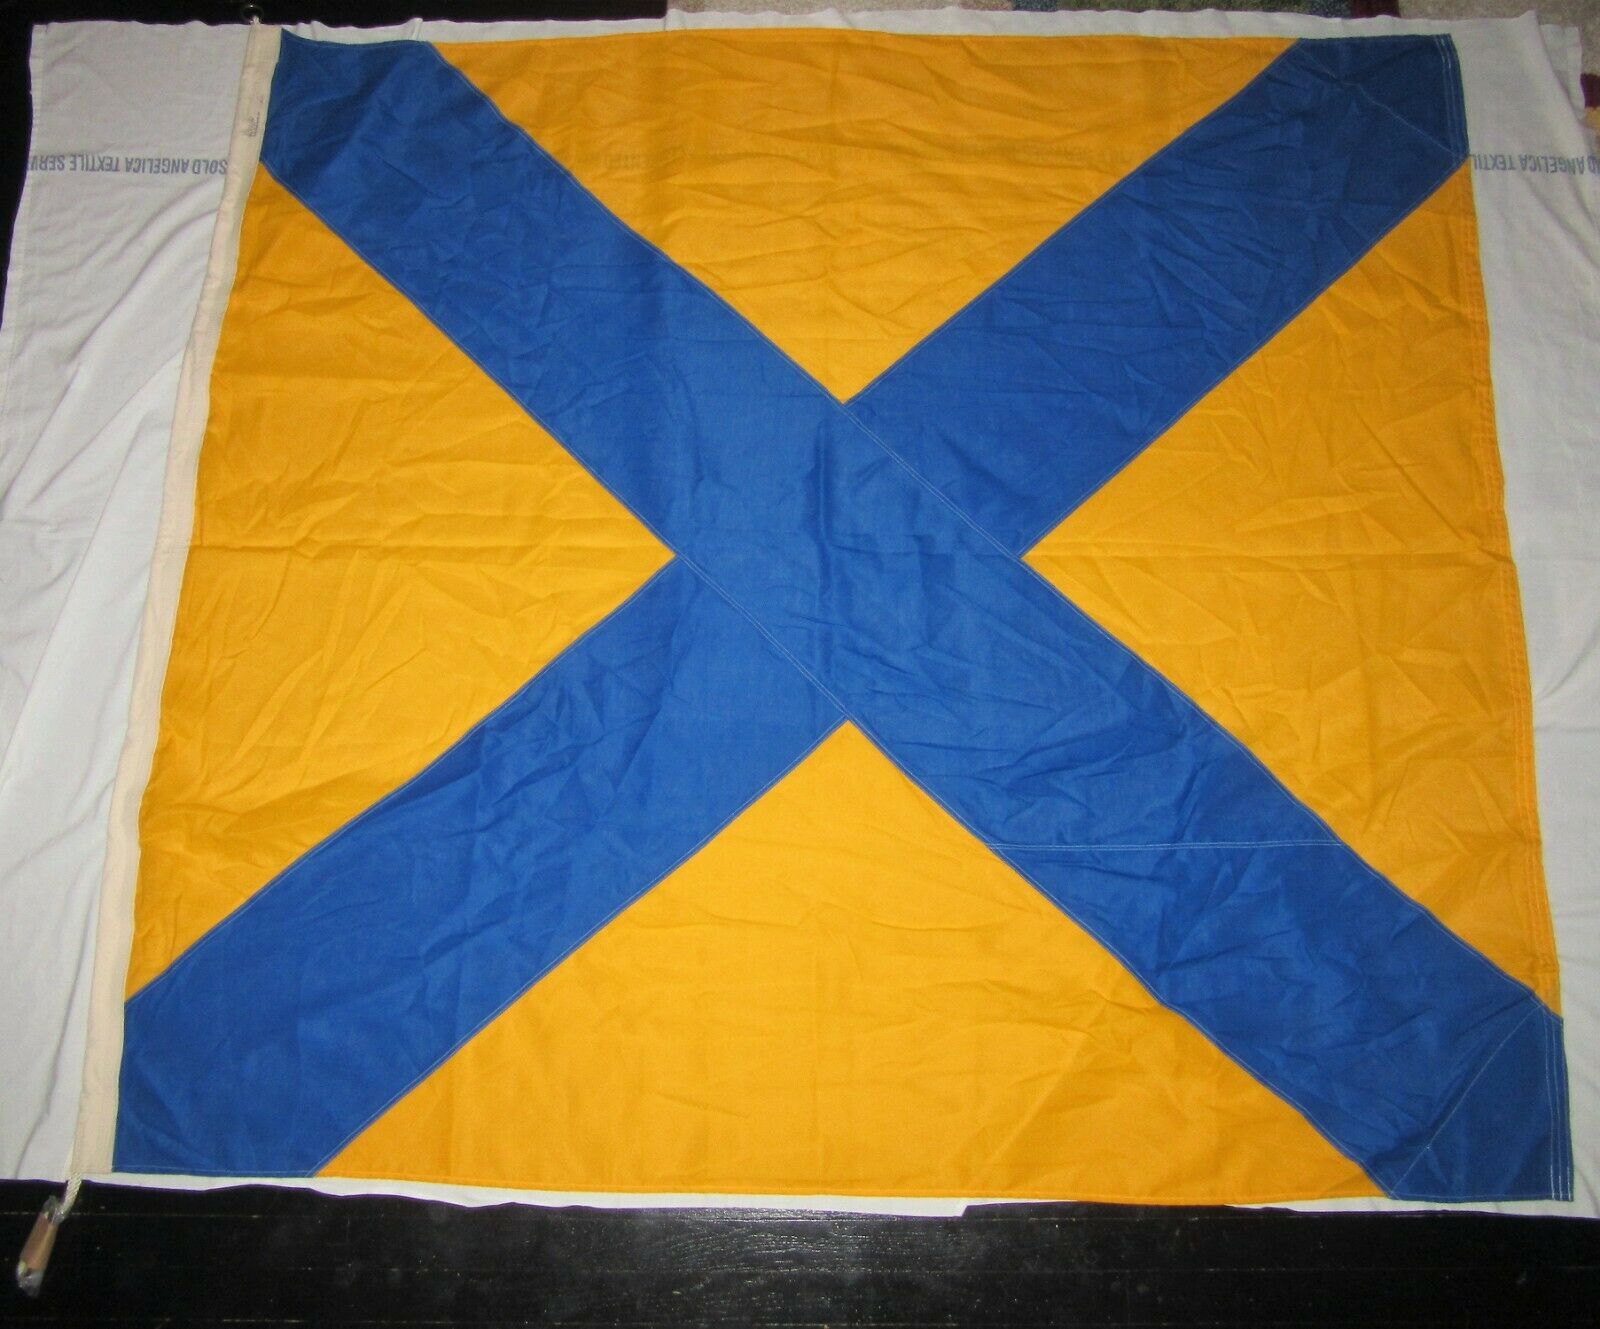 Us Navy Nato Maritime Signal Flag Numeral "5" Yellow Blue Cross New 5'9" X 5'6"